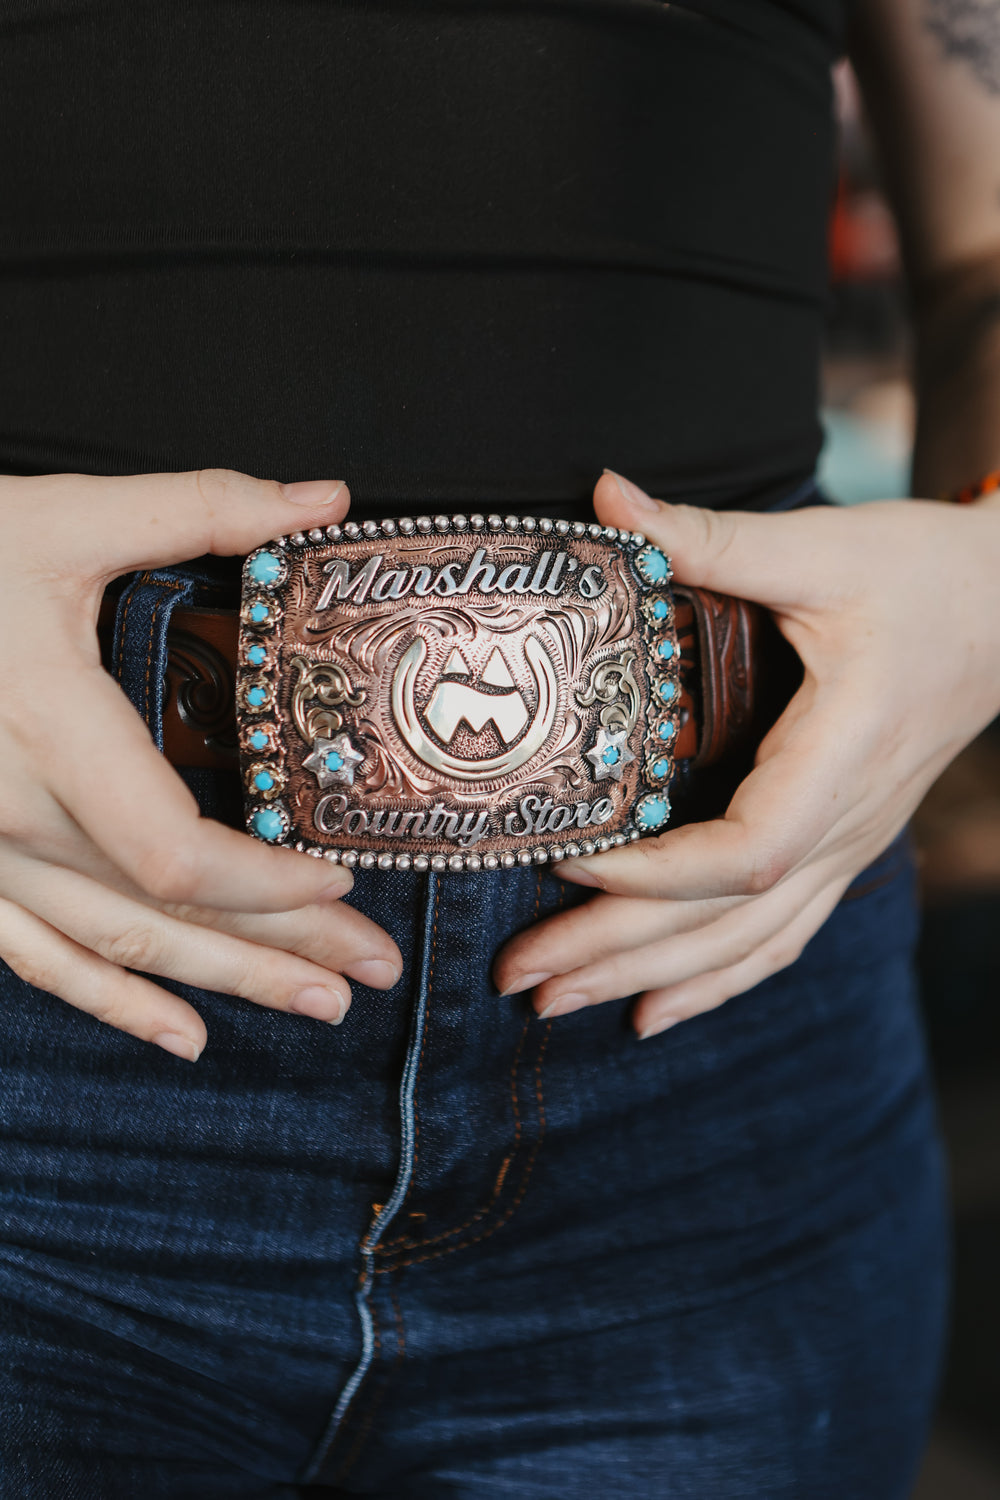 Marshall's Country Store - Rose Gold Buckle